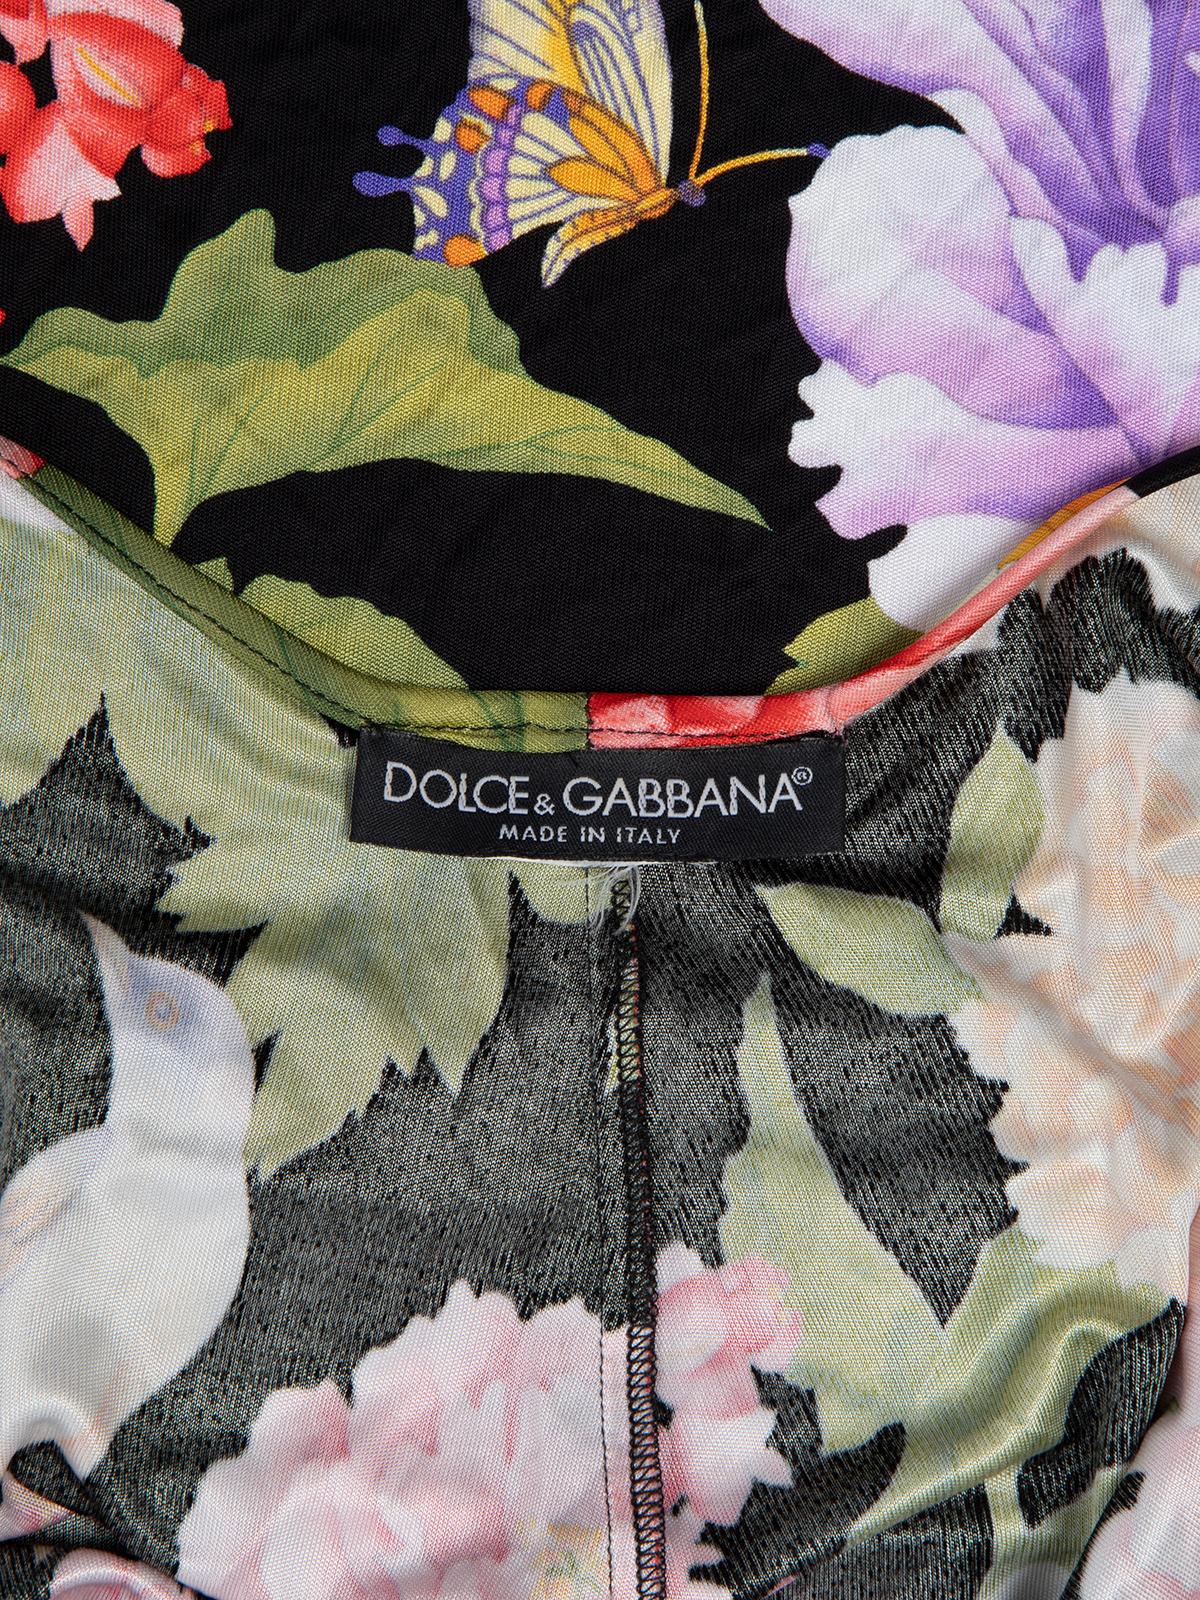 Pre-Loved Dolce & Gabbana Women's Butterfly and Floral Print Halter Top 2